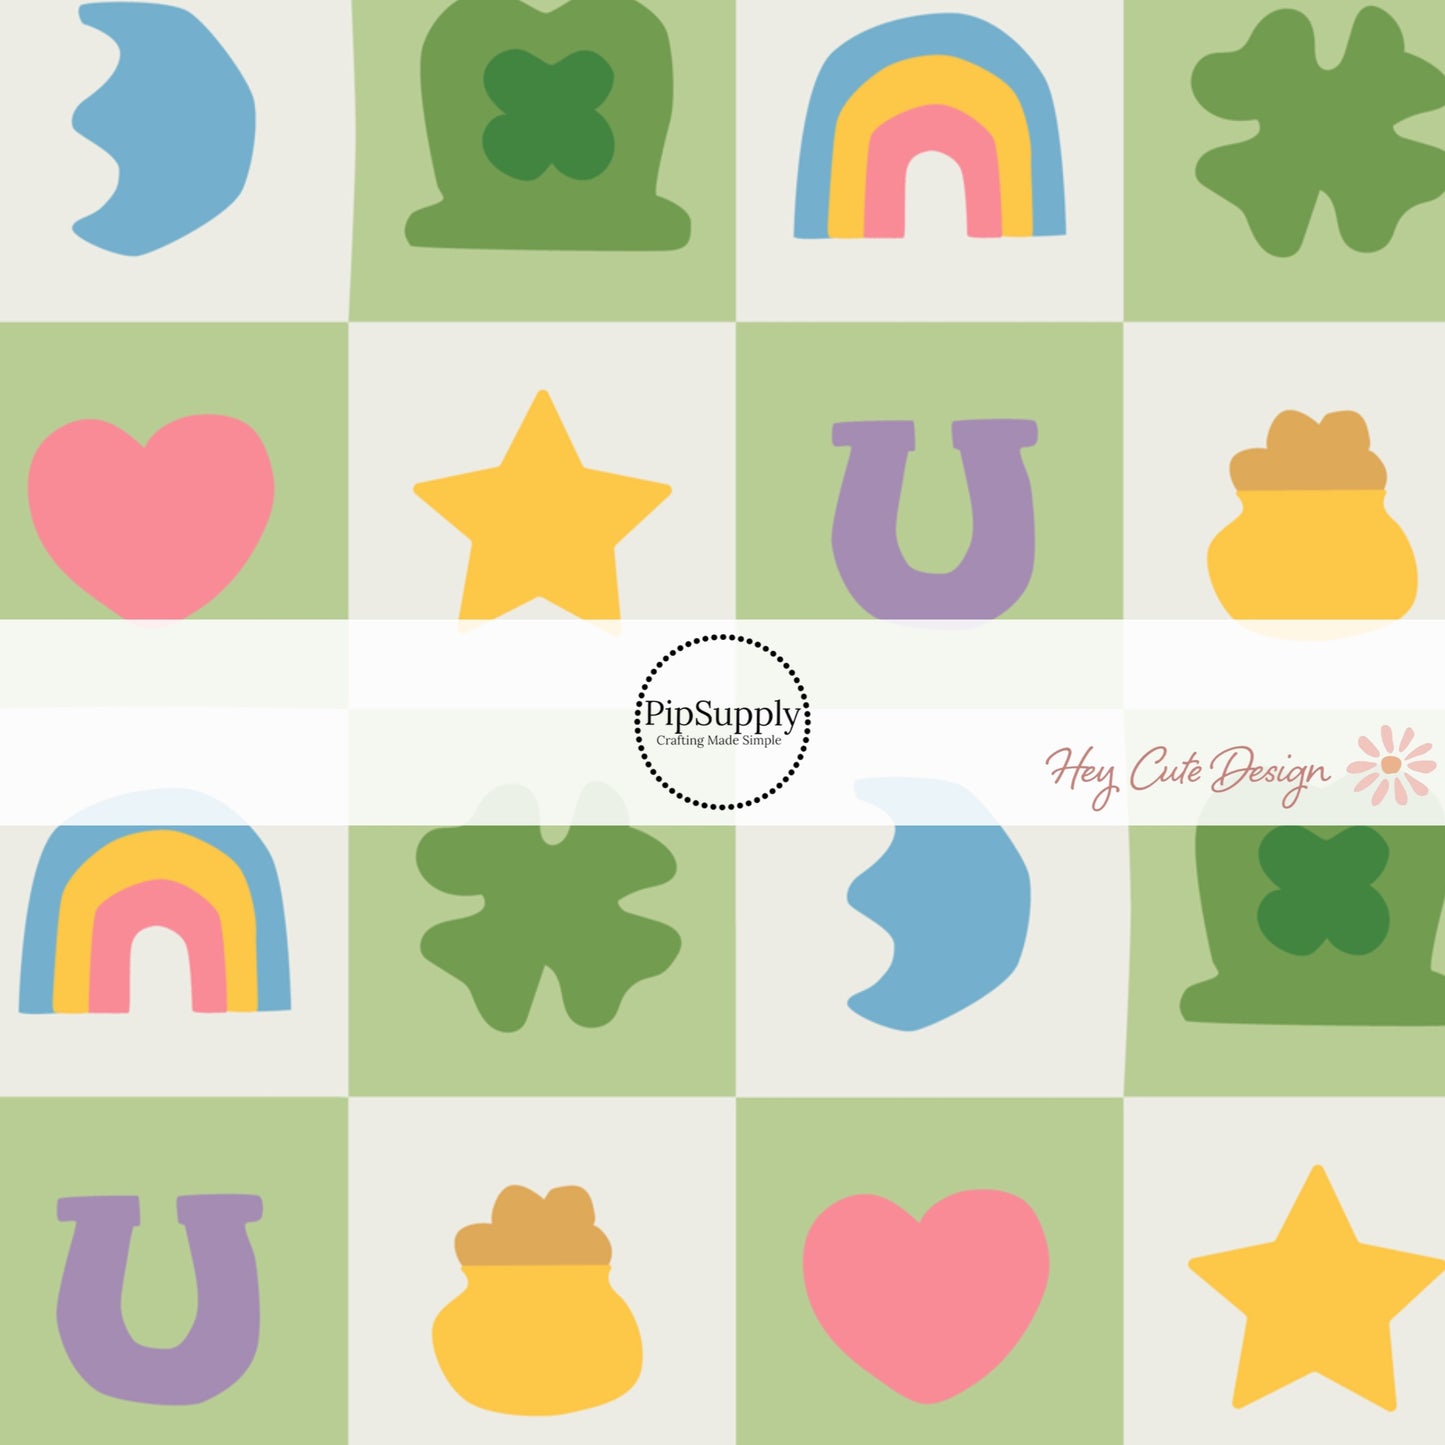 Green Checkered fabric by the yard pattern with shamrocks, star, and. pots of gold